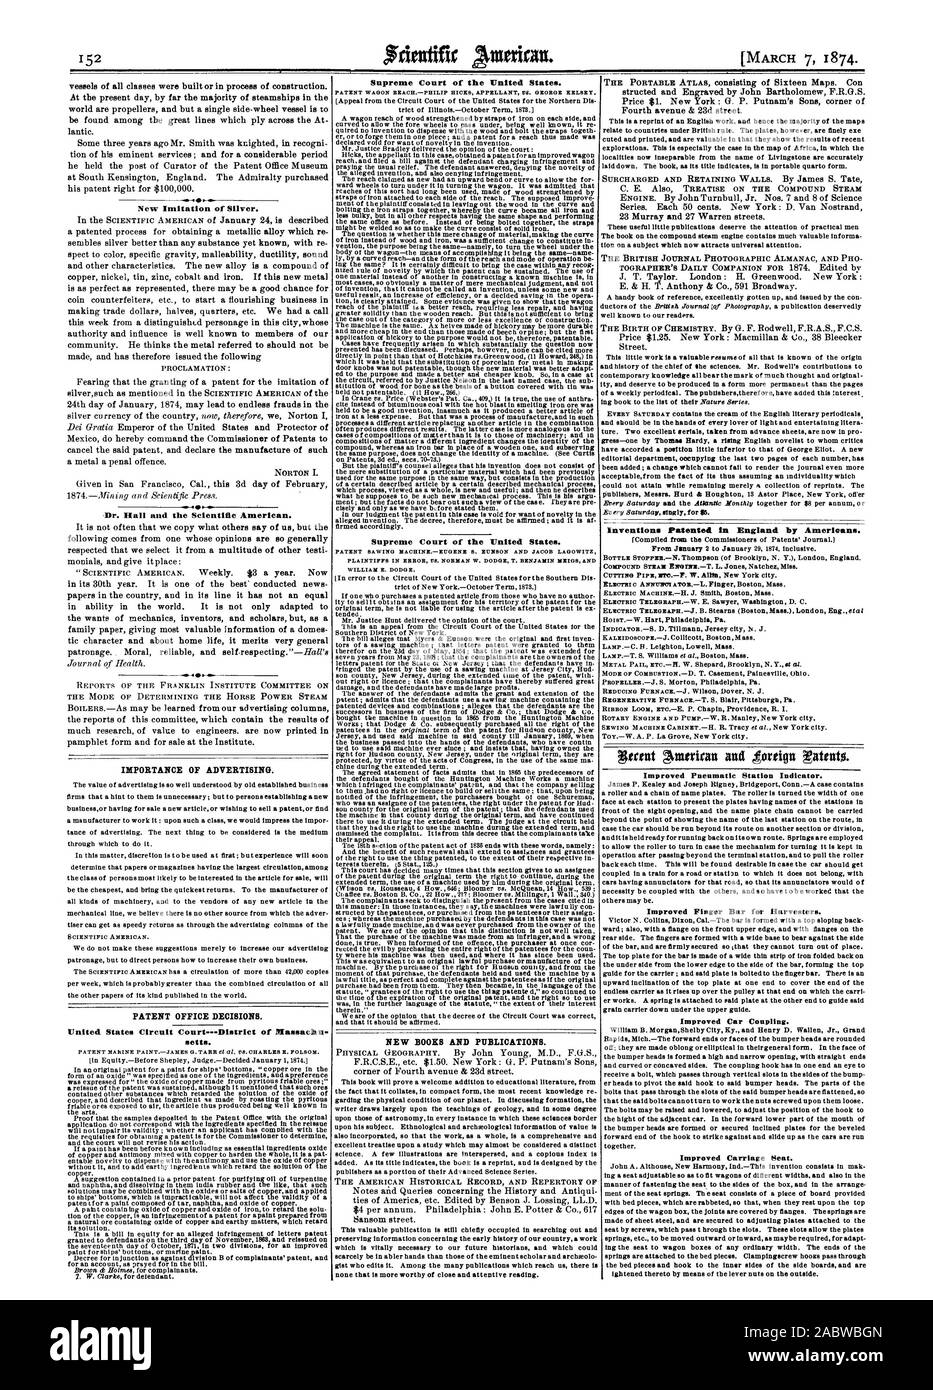 New Imitation of Silver. Dr. Hall and the Scientific American. SCIENTIFIC AMERICAN. United States Circuit Court—District of Massachu setts. Supreme Court of the United States. PATENT WAGON REACHPHILIP HICKS APPELLANT VS. GEORGE KELSEY. Supreme Court of the United States. PATENT SAWING MACHINEEUGENE S. EINSON AND JACOB LAGOWITZ WILLIAM E. DODGE. Inventions Patented in England by Americans. Improved Pneumatic Station Indicator. Improved Finger Bar for Harvesters. Improved Car Coupling. Improved Carriage Seat., 1874-03-07 Stock Photo